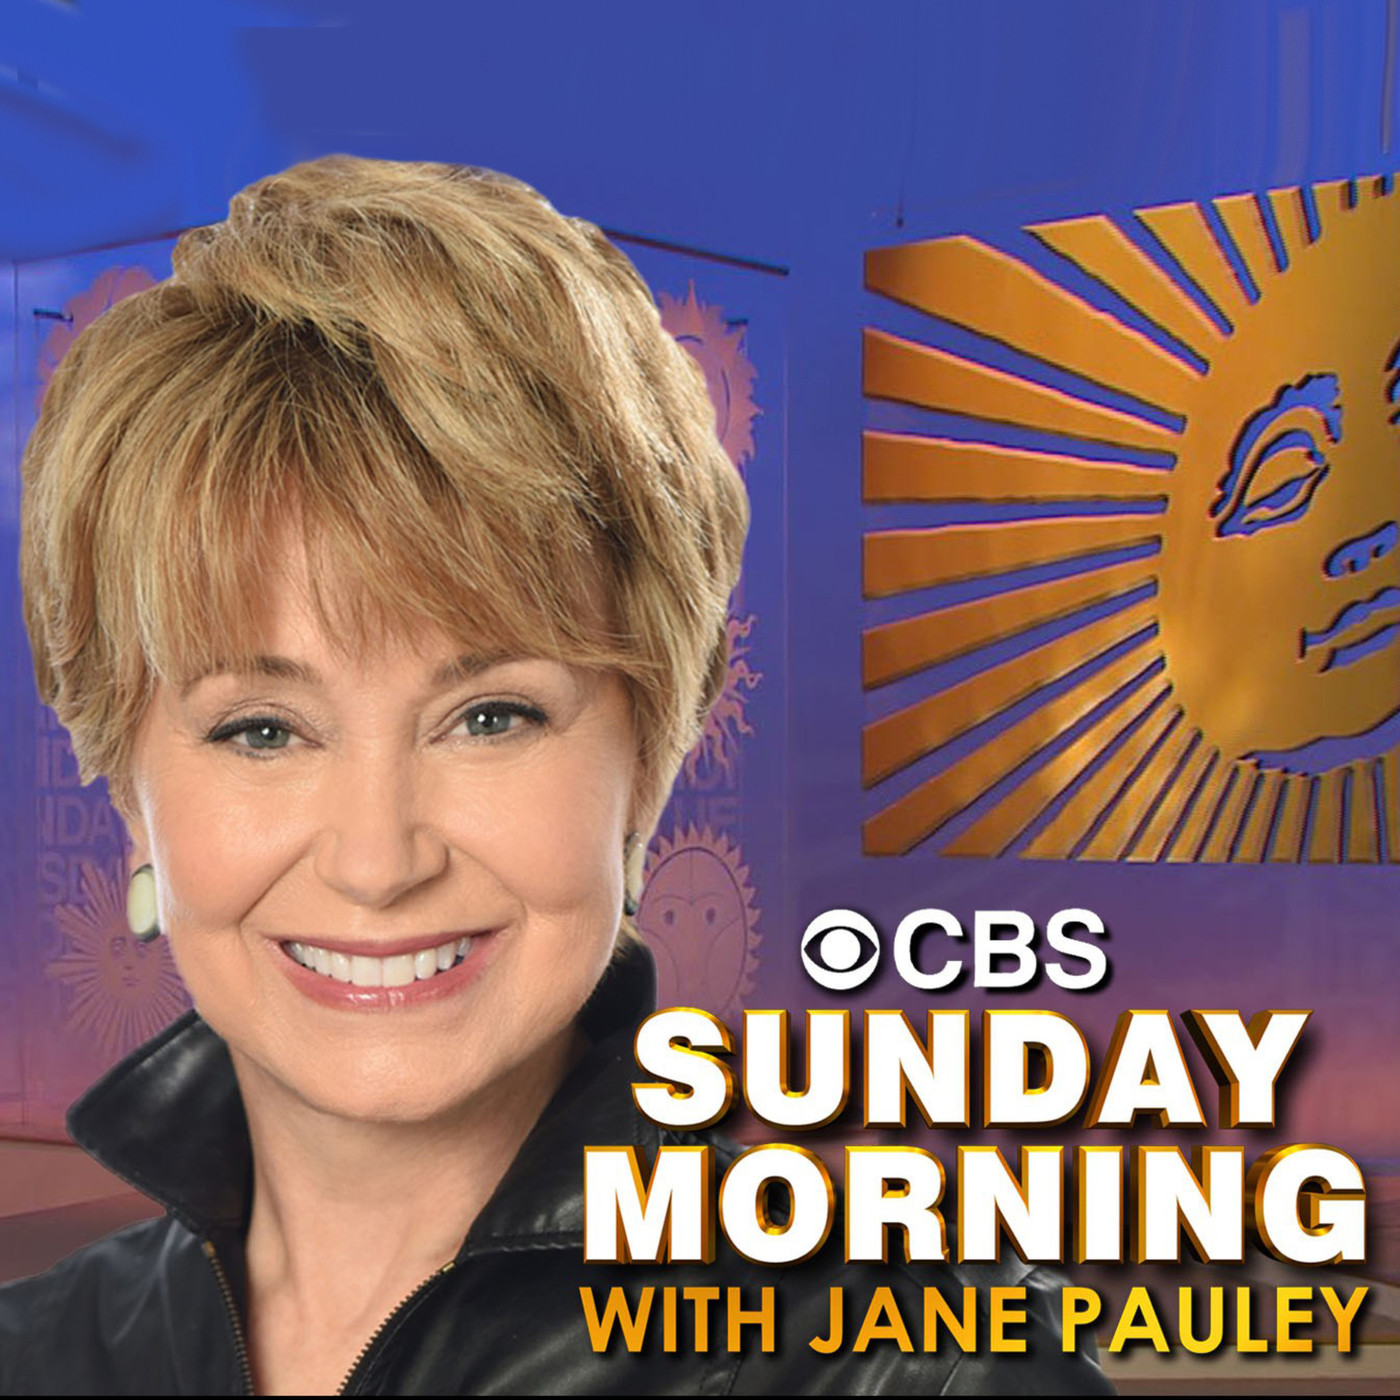 Jane featured in the cover of CBS Sunday Morning